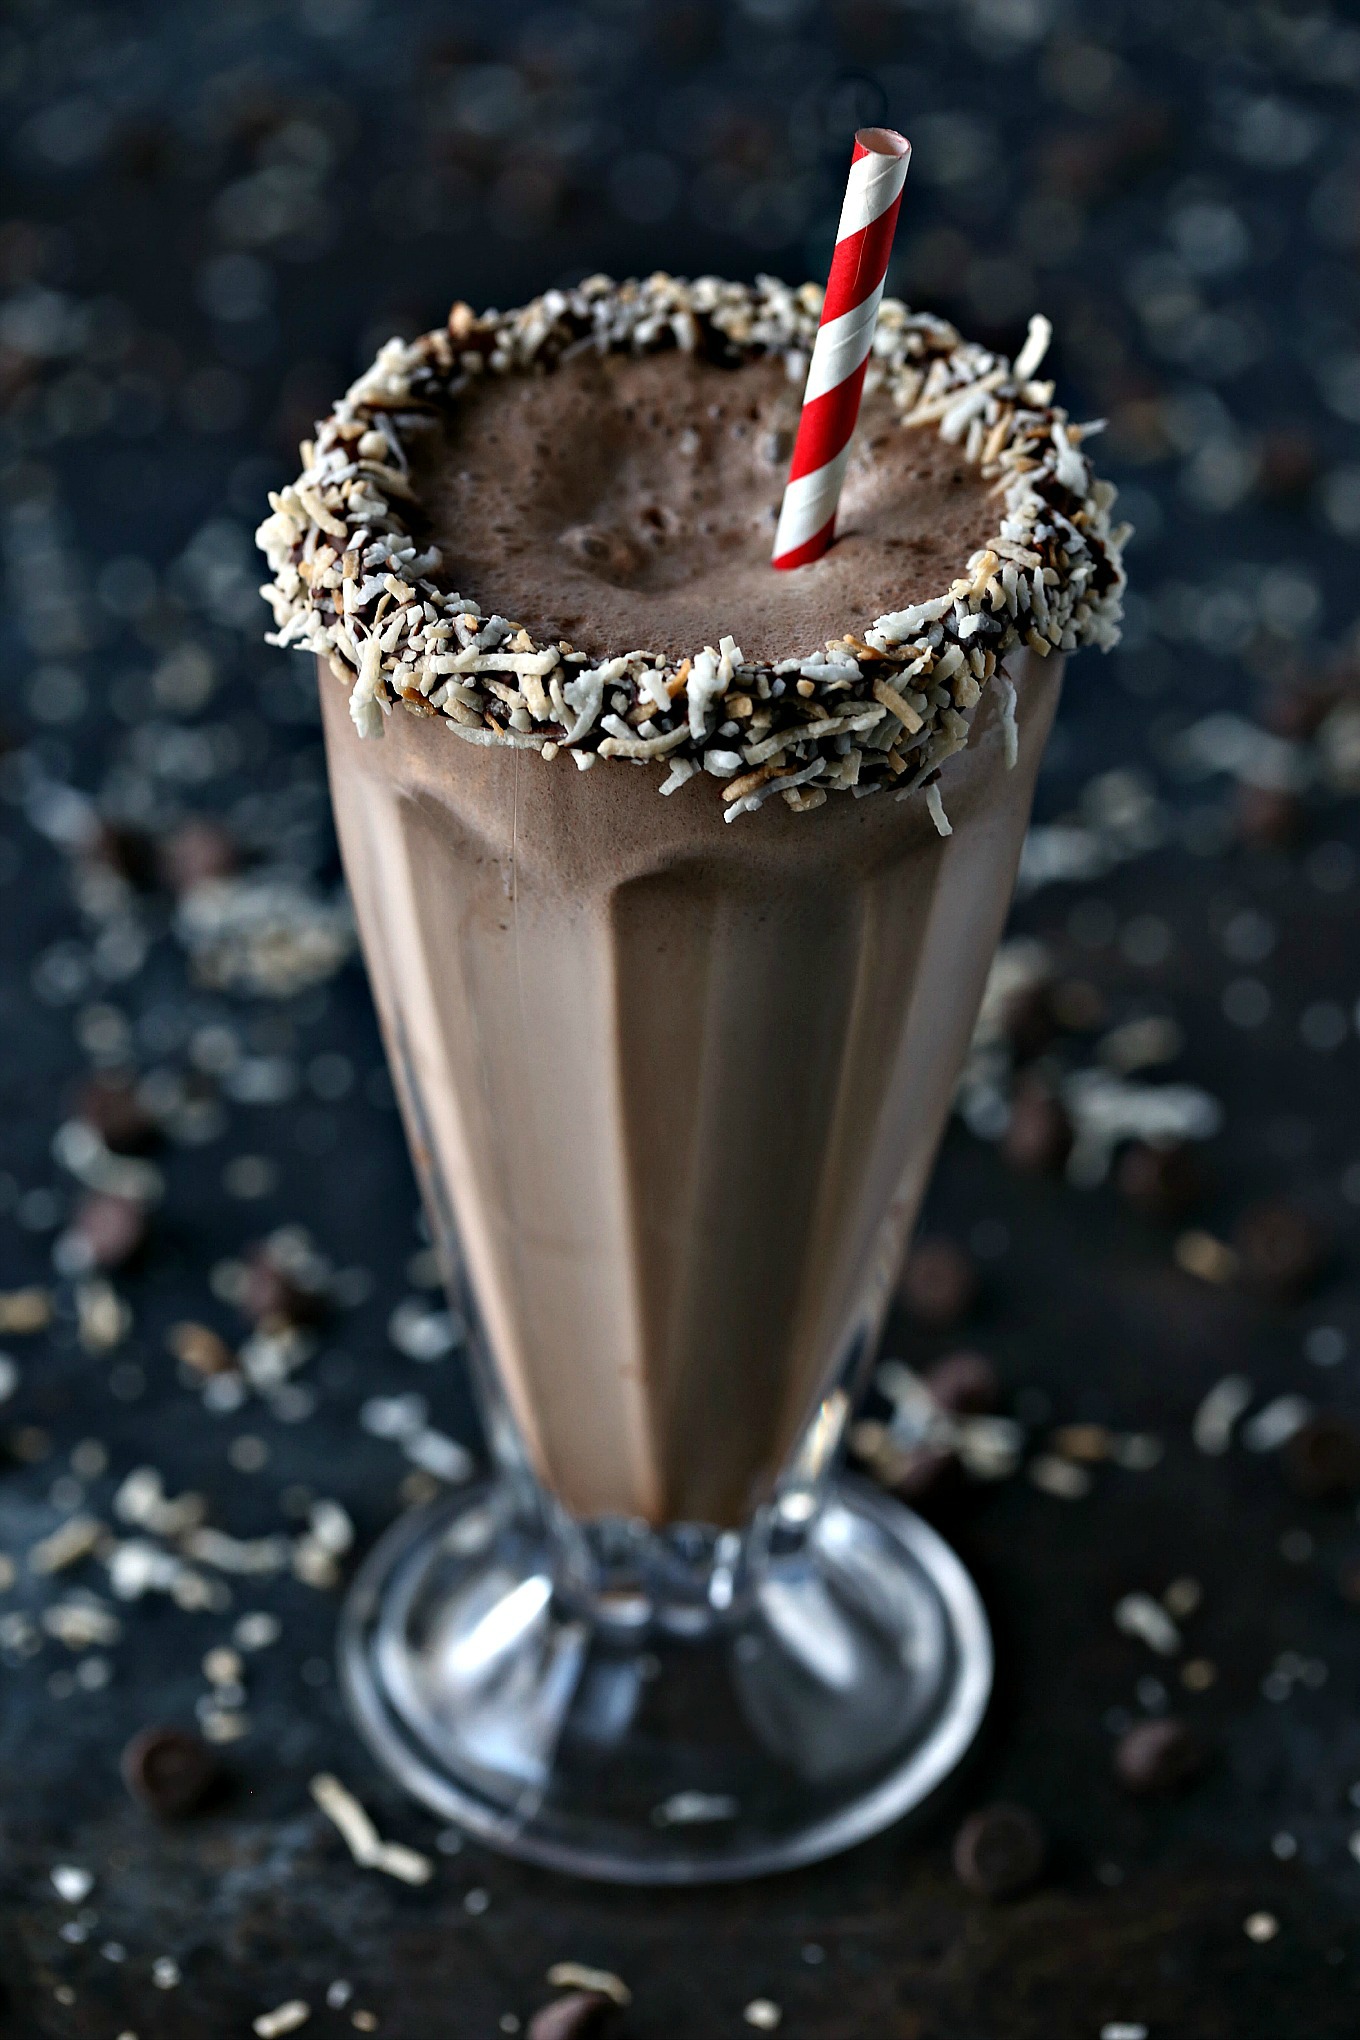 Chocolate Coconut Milkshakes. This chocolate and coconut milkshake is the perfect drink for game day, cookouts or family gatherings. Chocolate and coconut pair perfectly in this tasty milkshake.